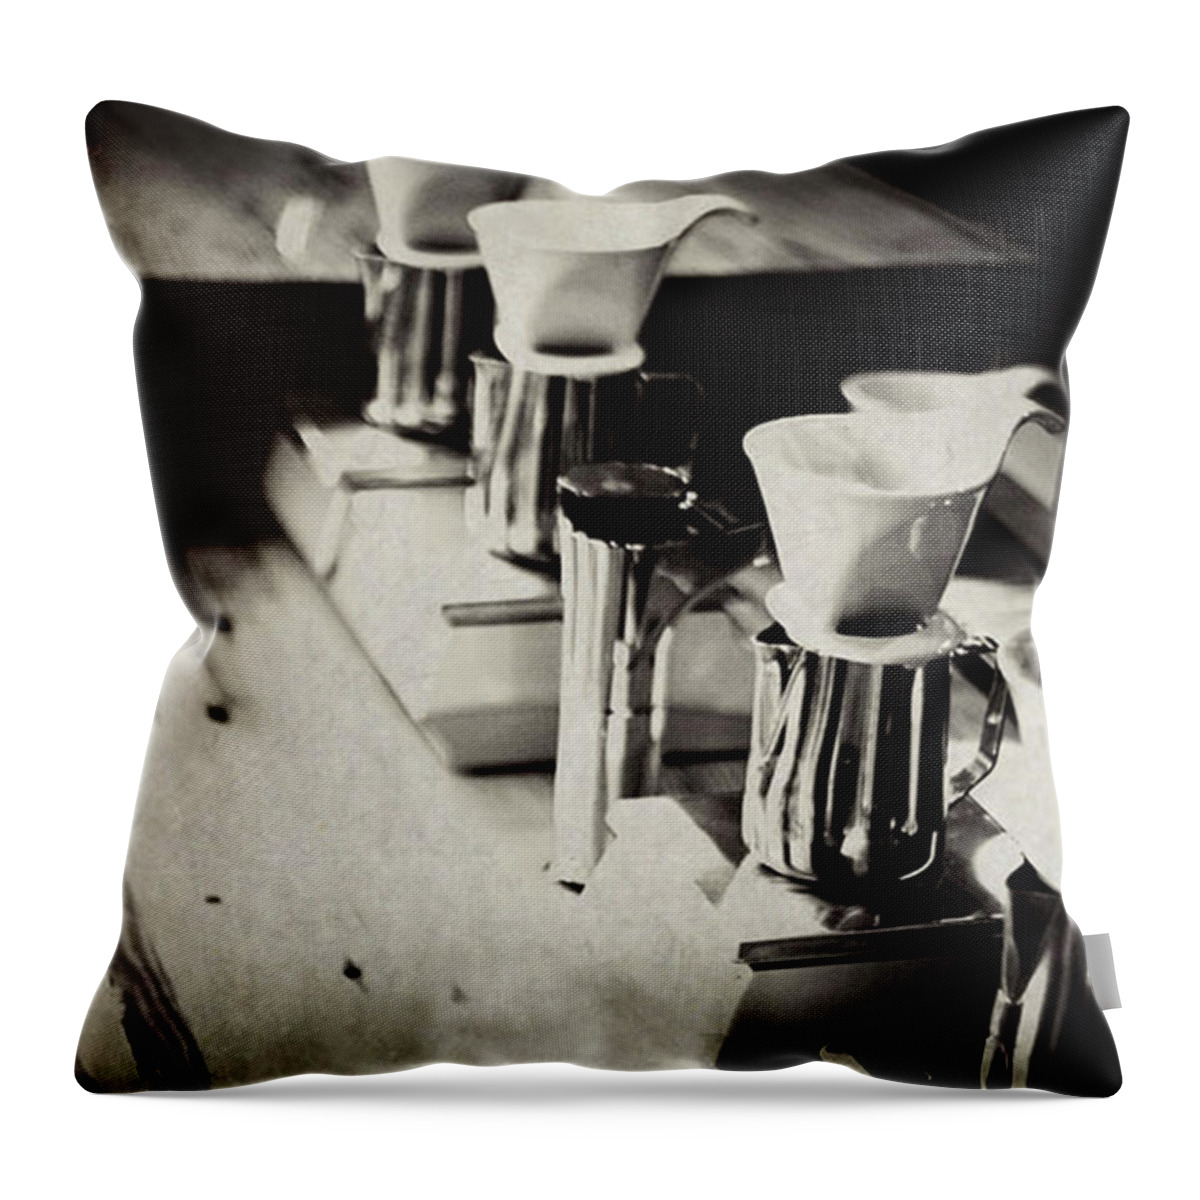 Retail Throw Pillow featuring the photograph Coffee Shop by Hilde Wegner . Photography